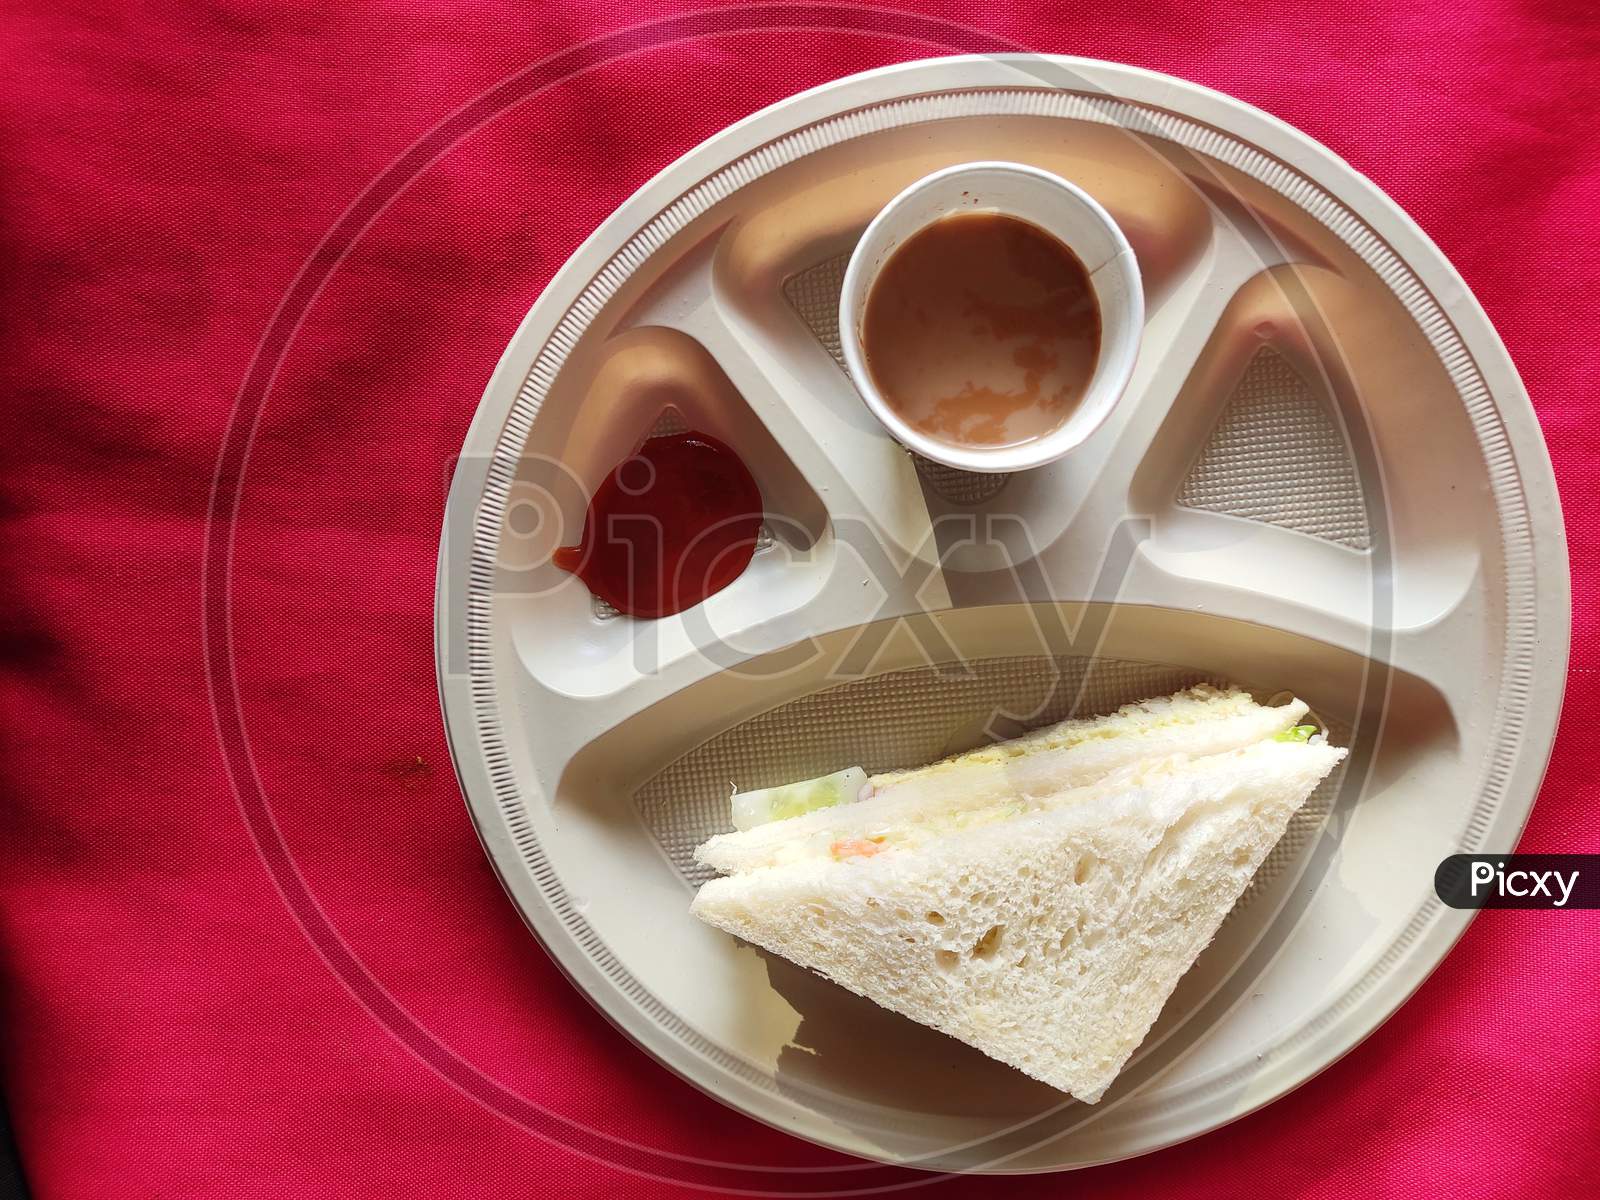 Top view: Sandwiches with tomato sauce and a cup of tea in the plate in breakfast